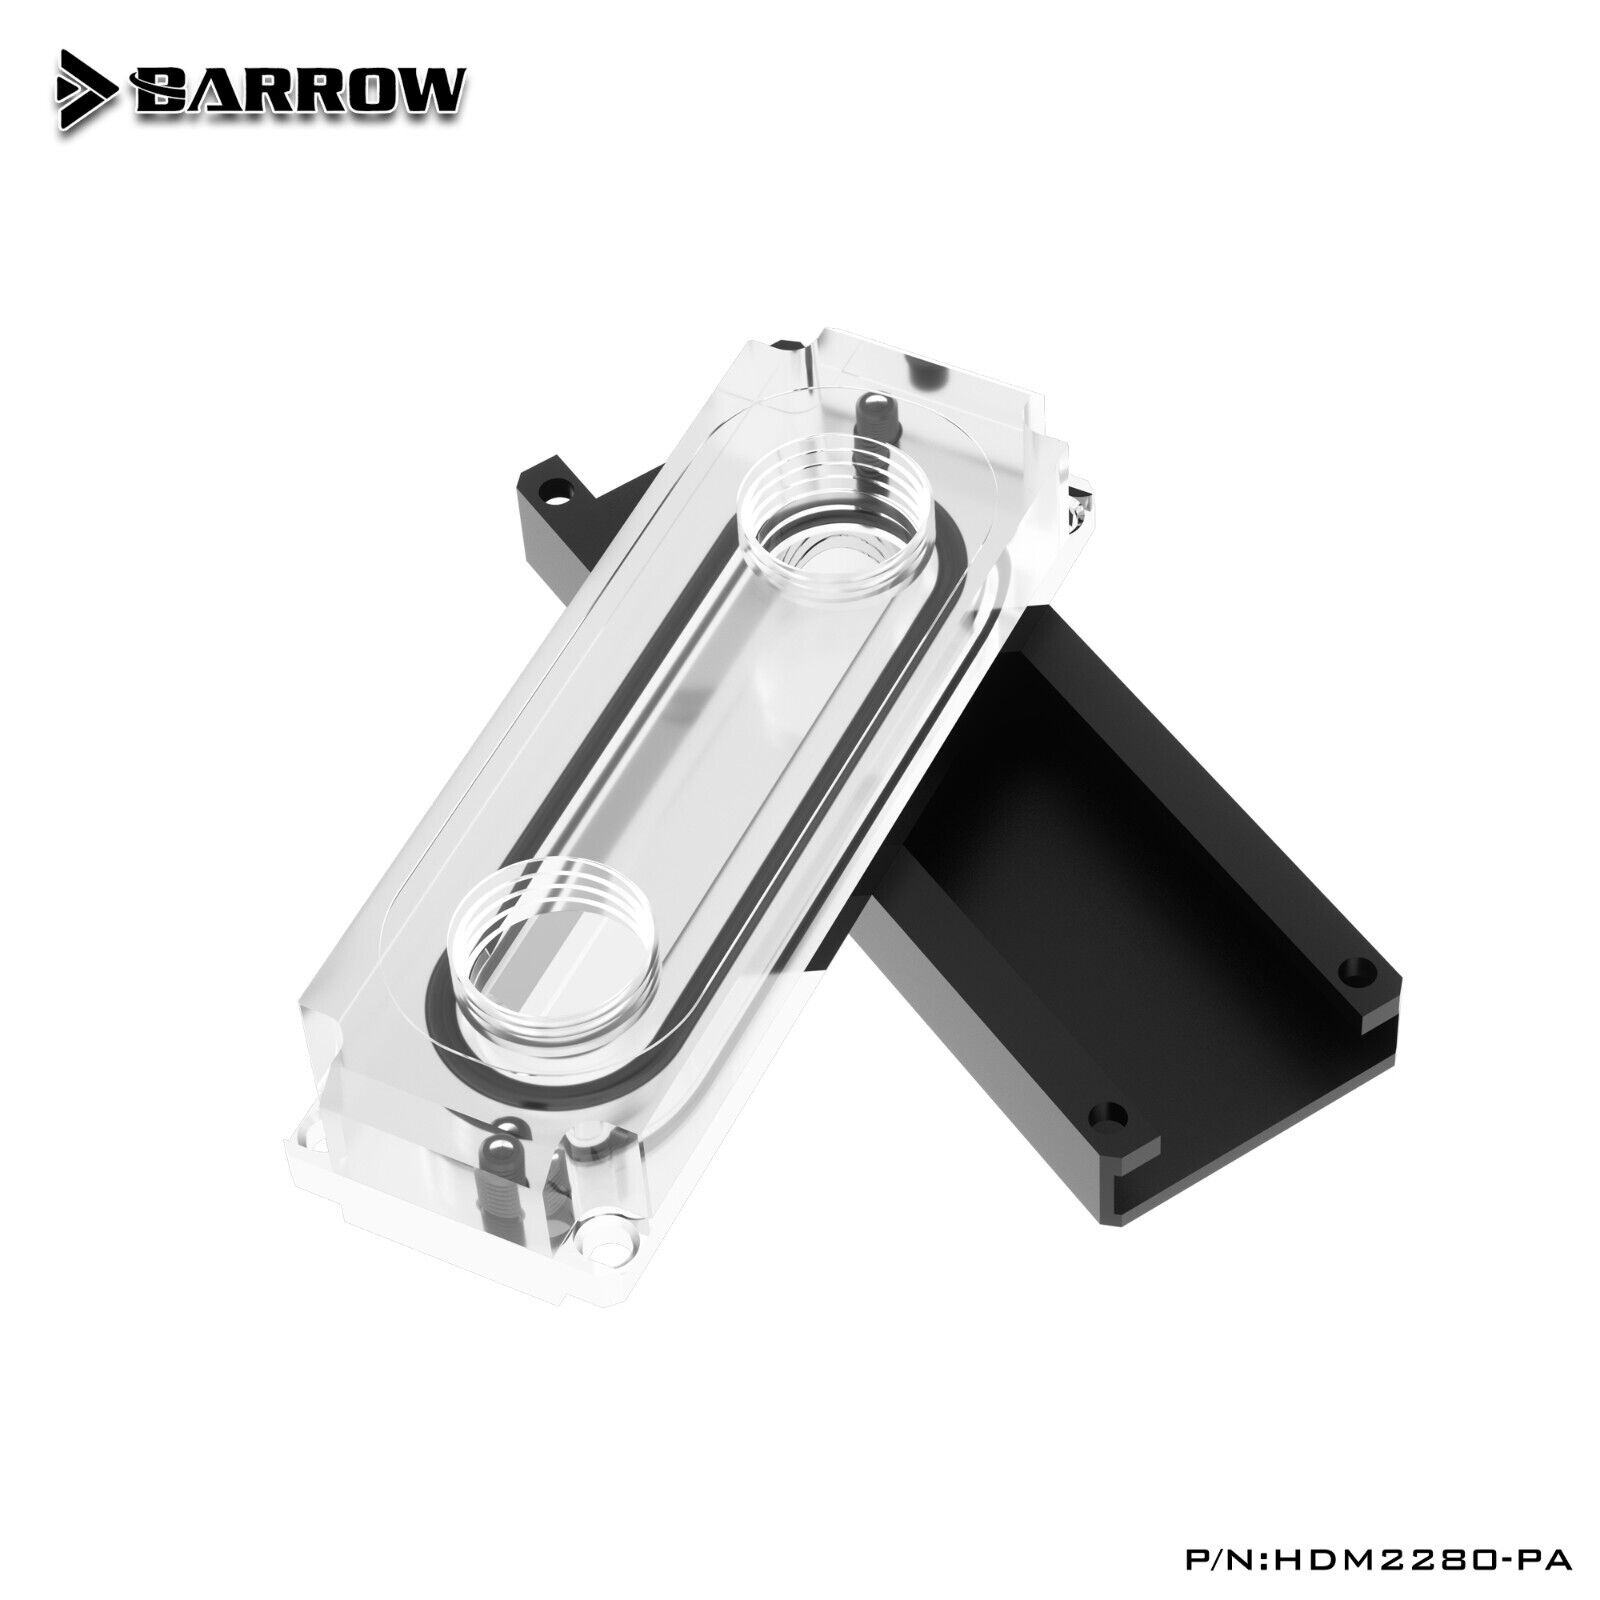 Barrow Water Block For M.2 SSD 2280 22110 PC Water Cooling WaterBlock HDM2280-PA